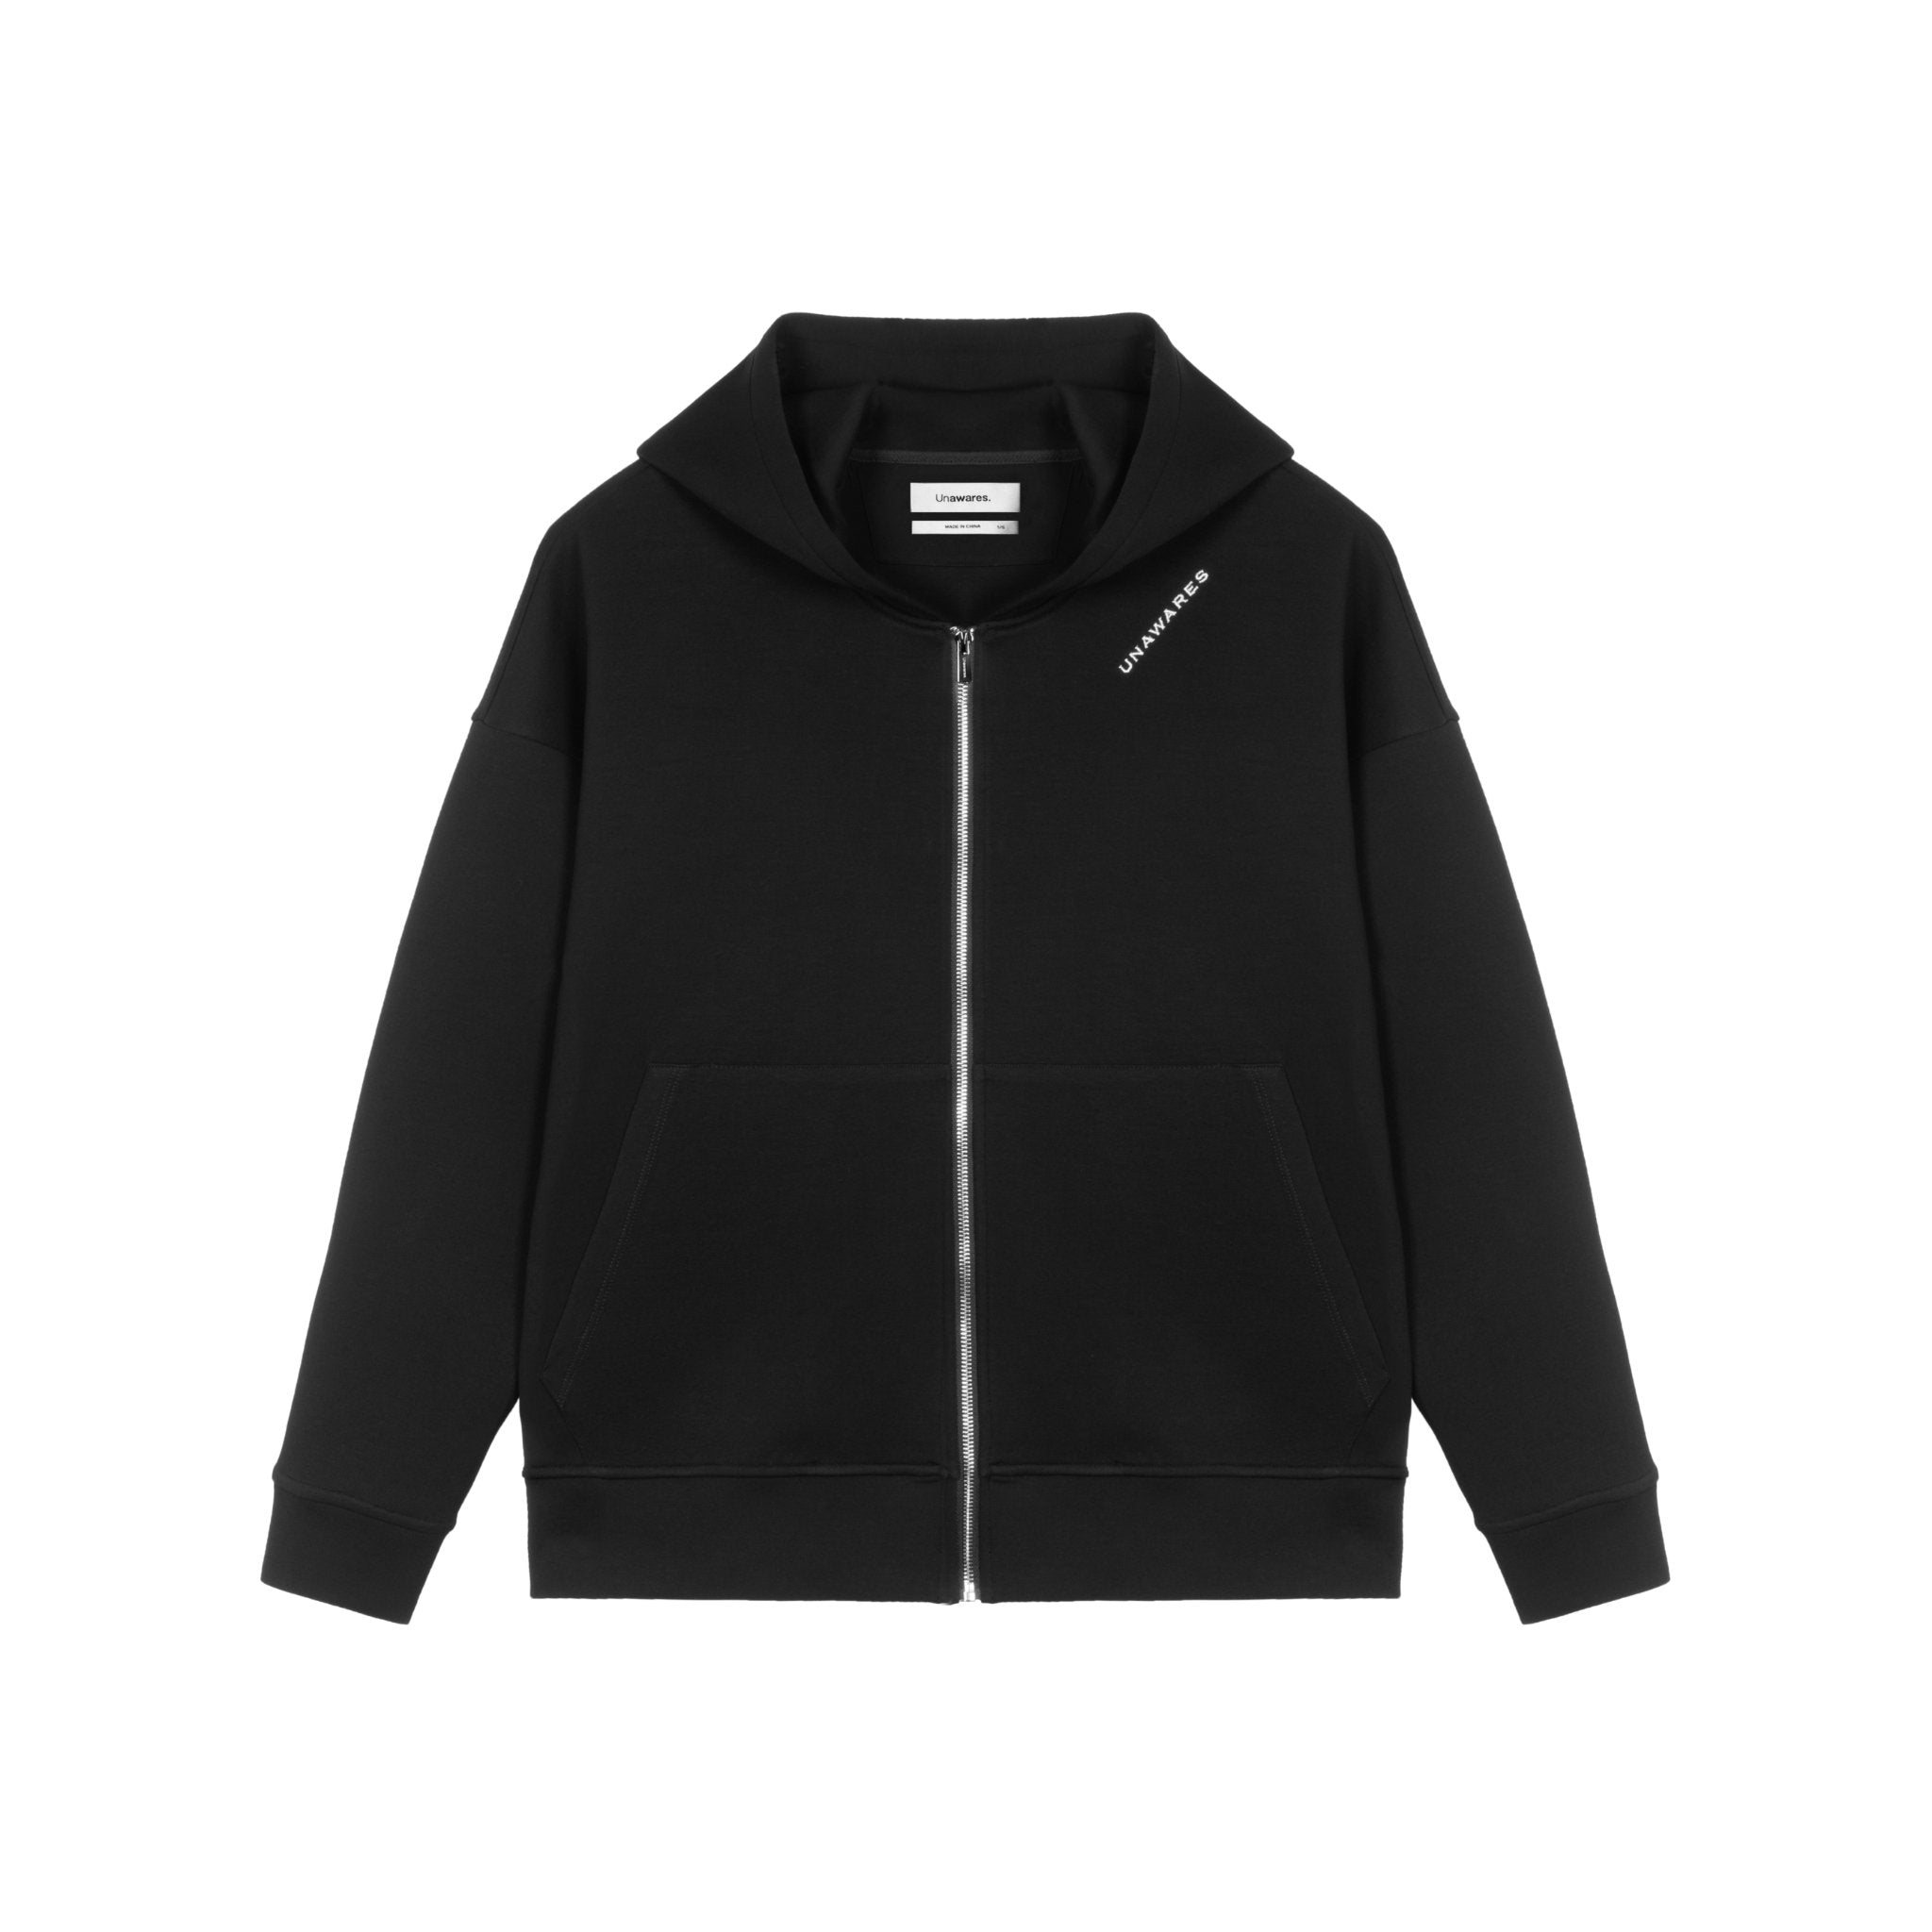 UNAWARES Black Zipper Silver Thread Embroidery Oversized Hoodie Jacket | MADA IN CHINA